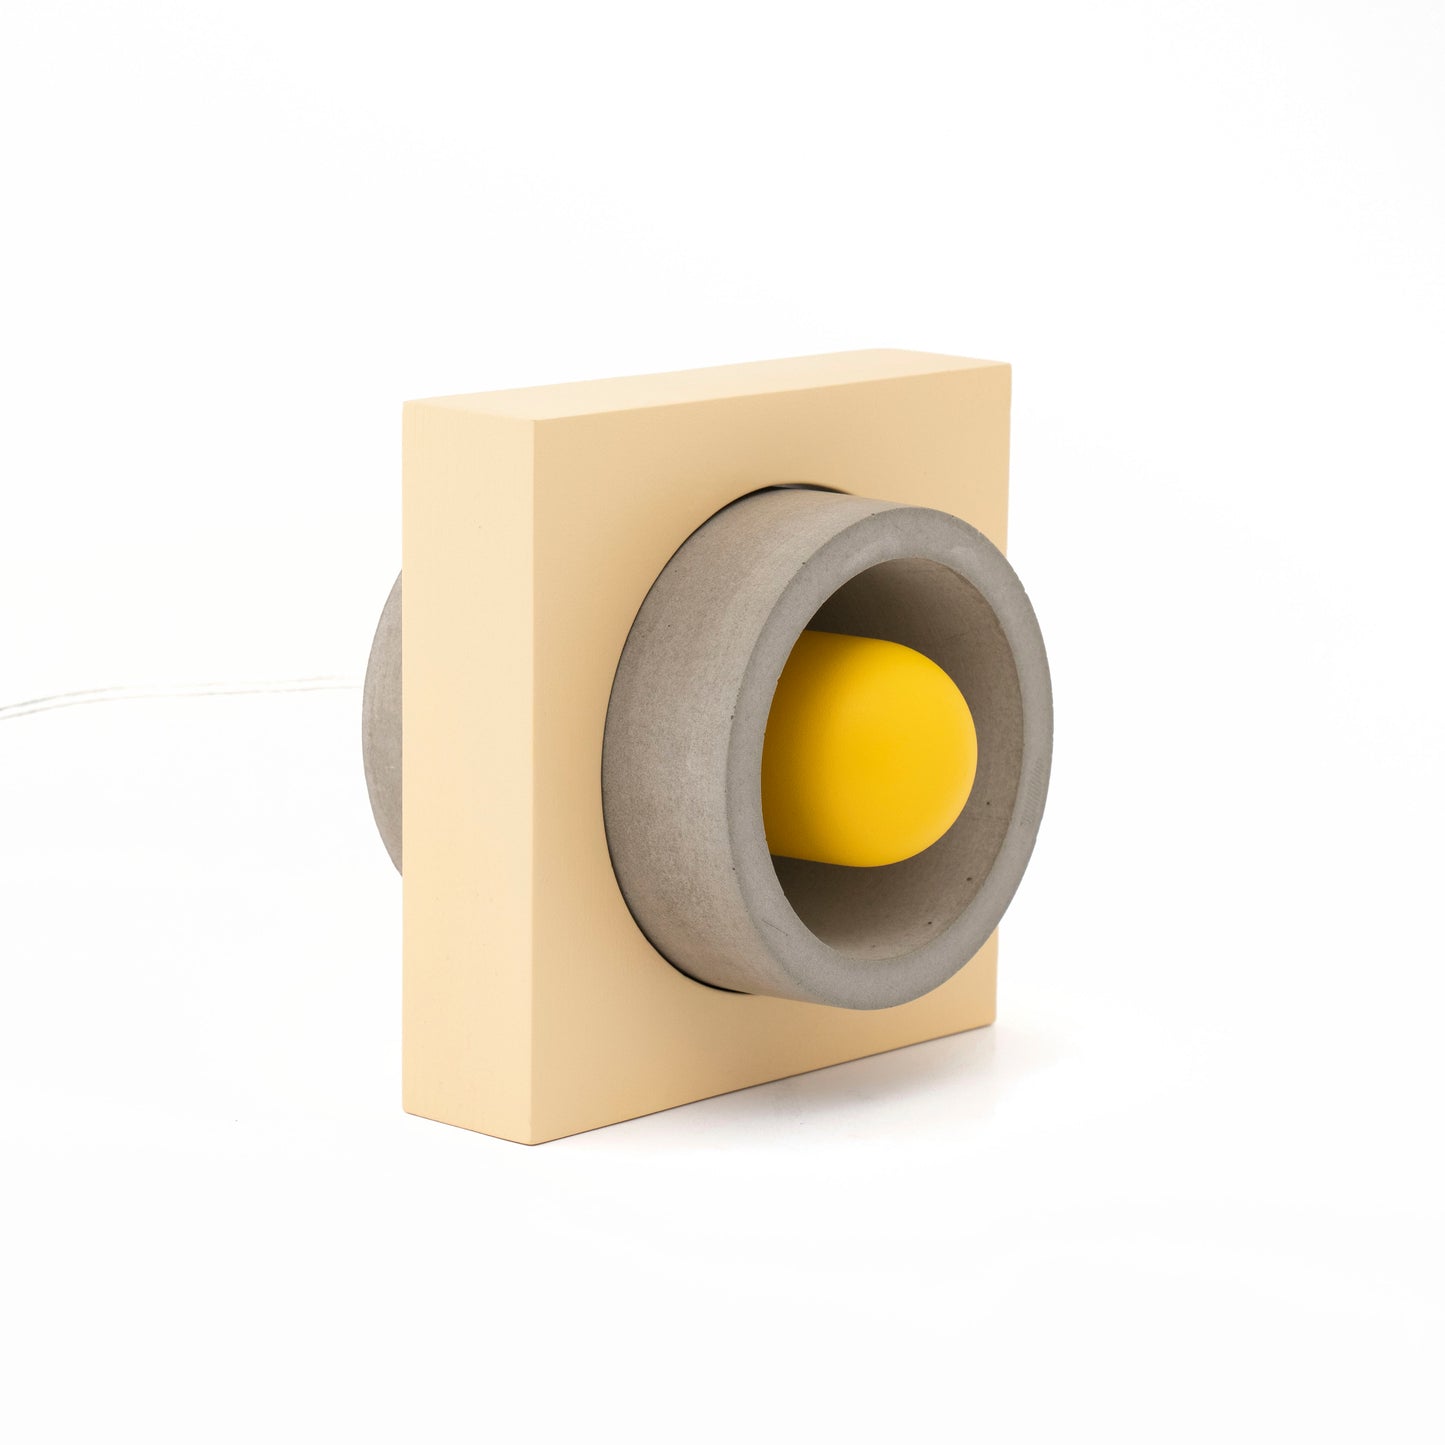 Beige Donut Color Table Lamp